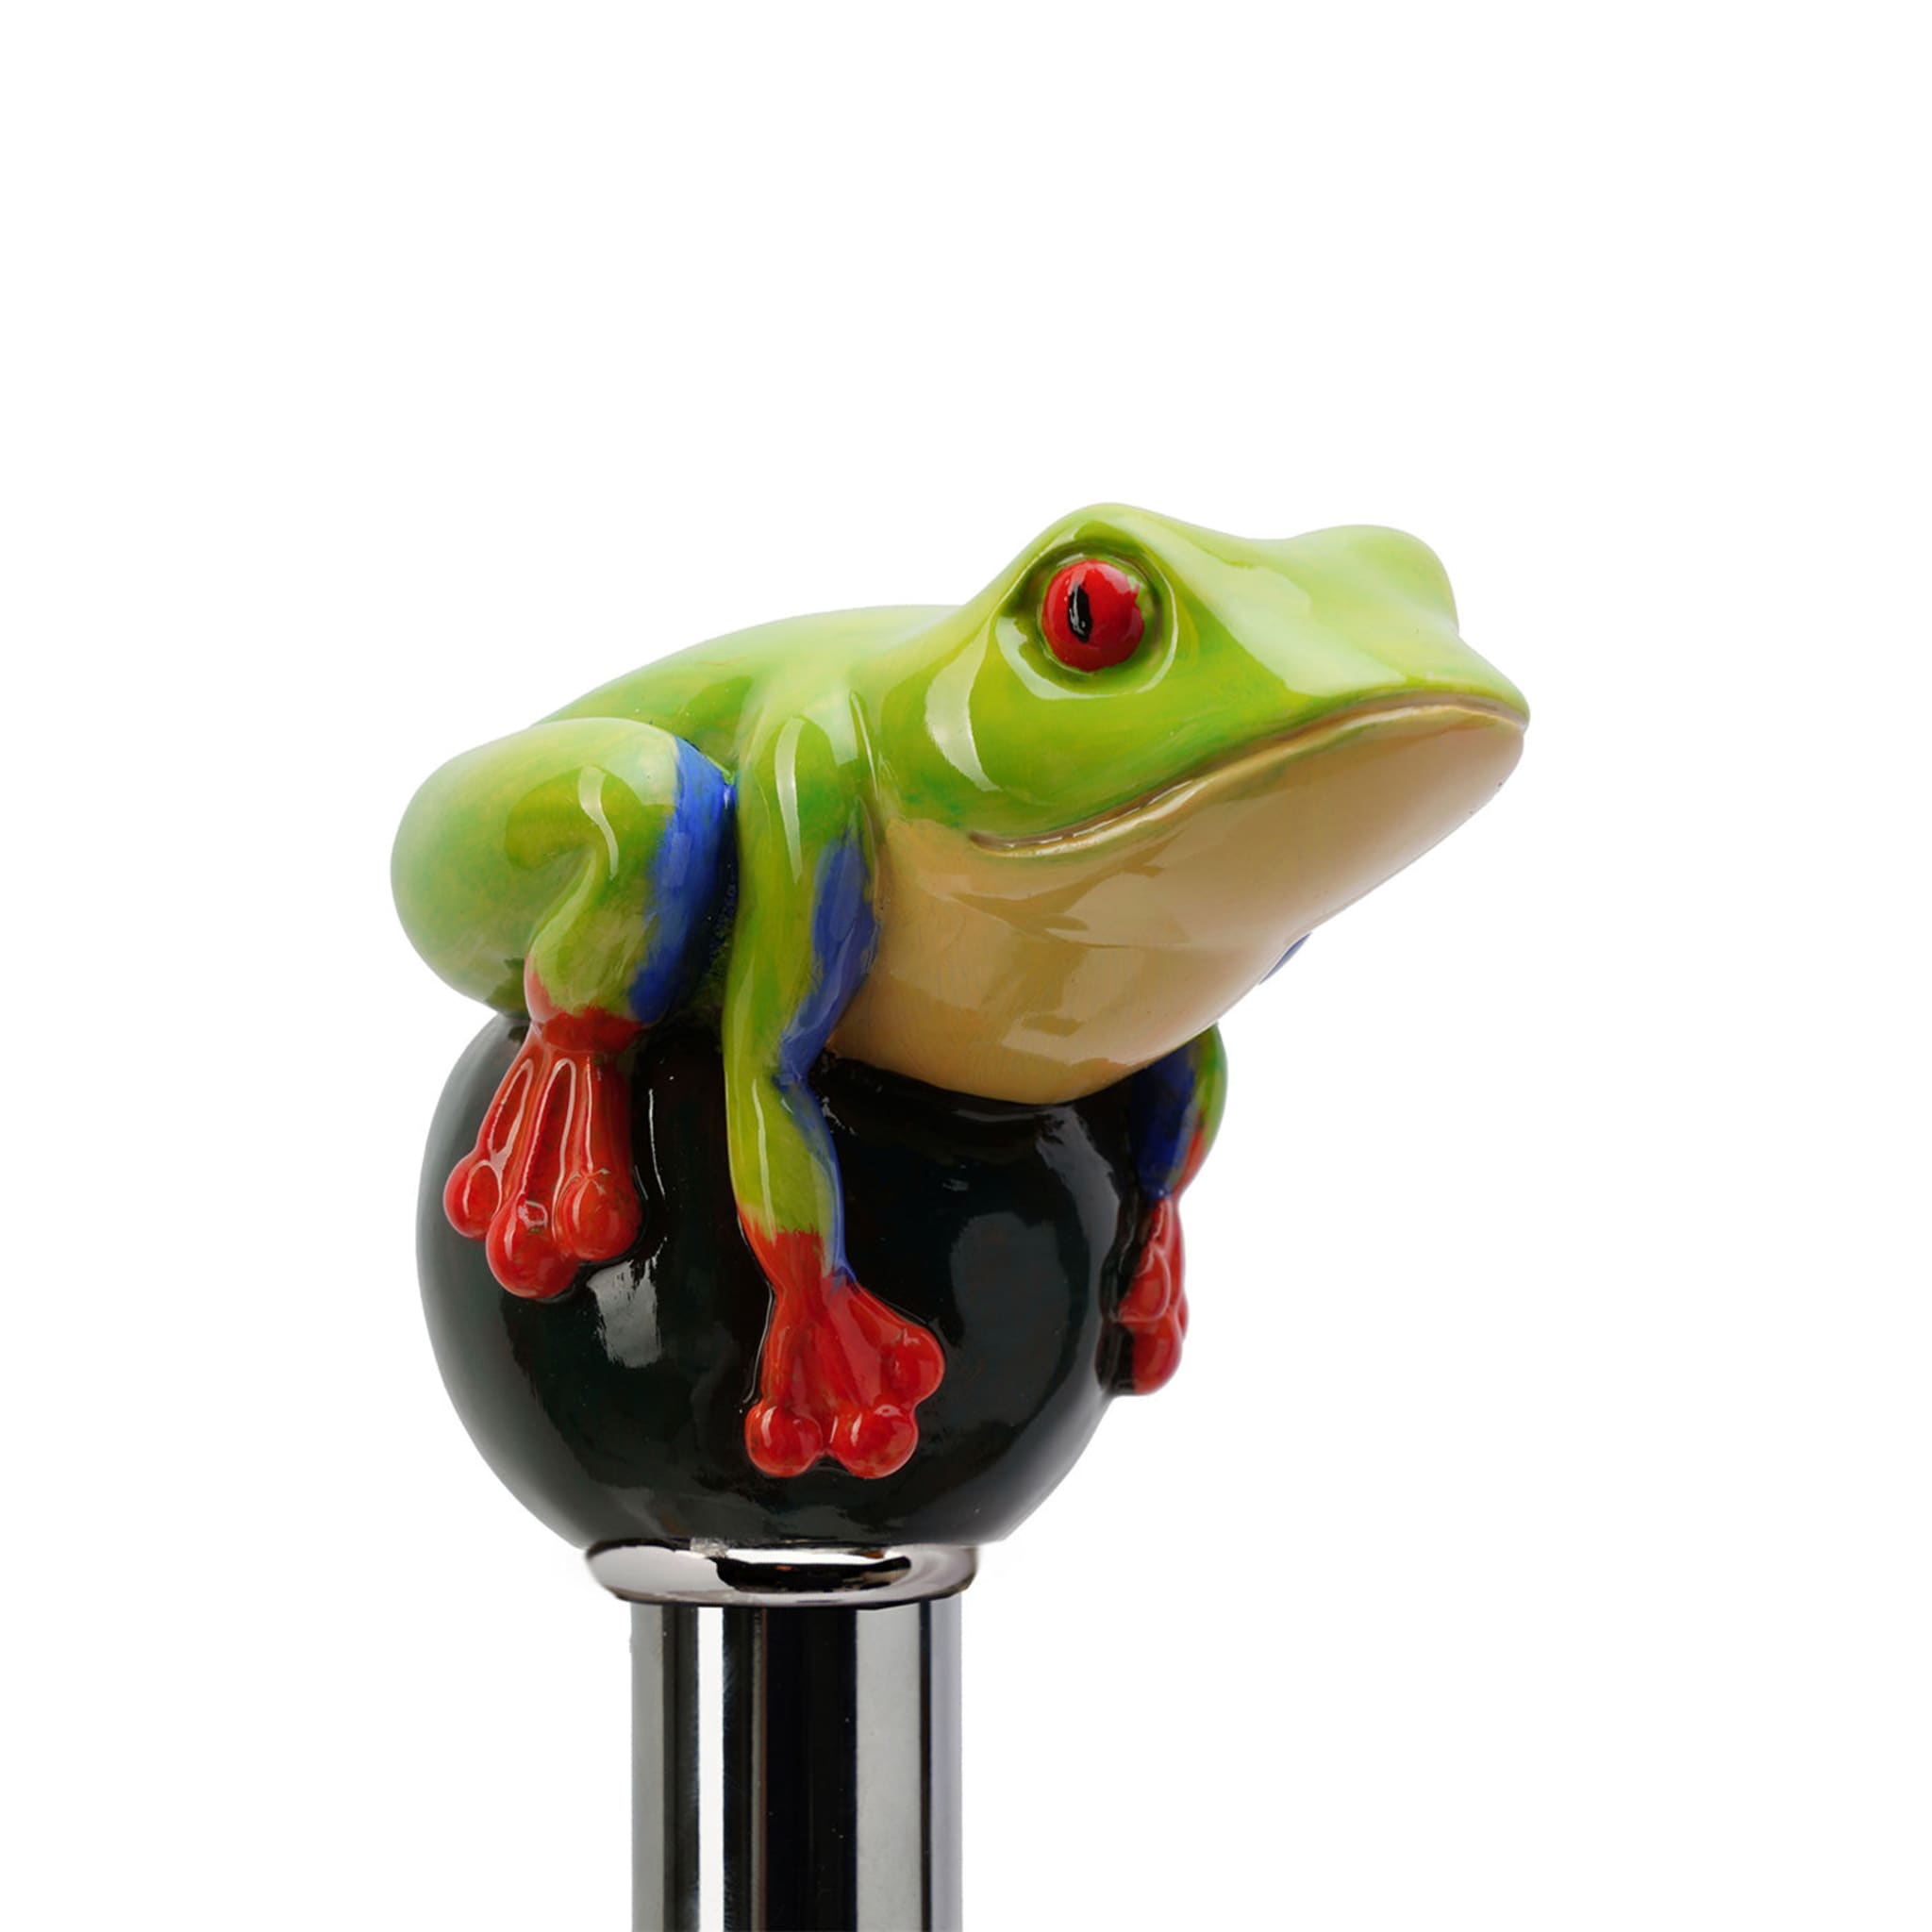 Green Frog Shoehorn - Alternative view 2